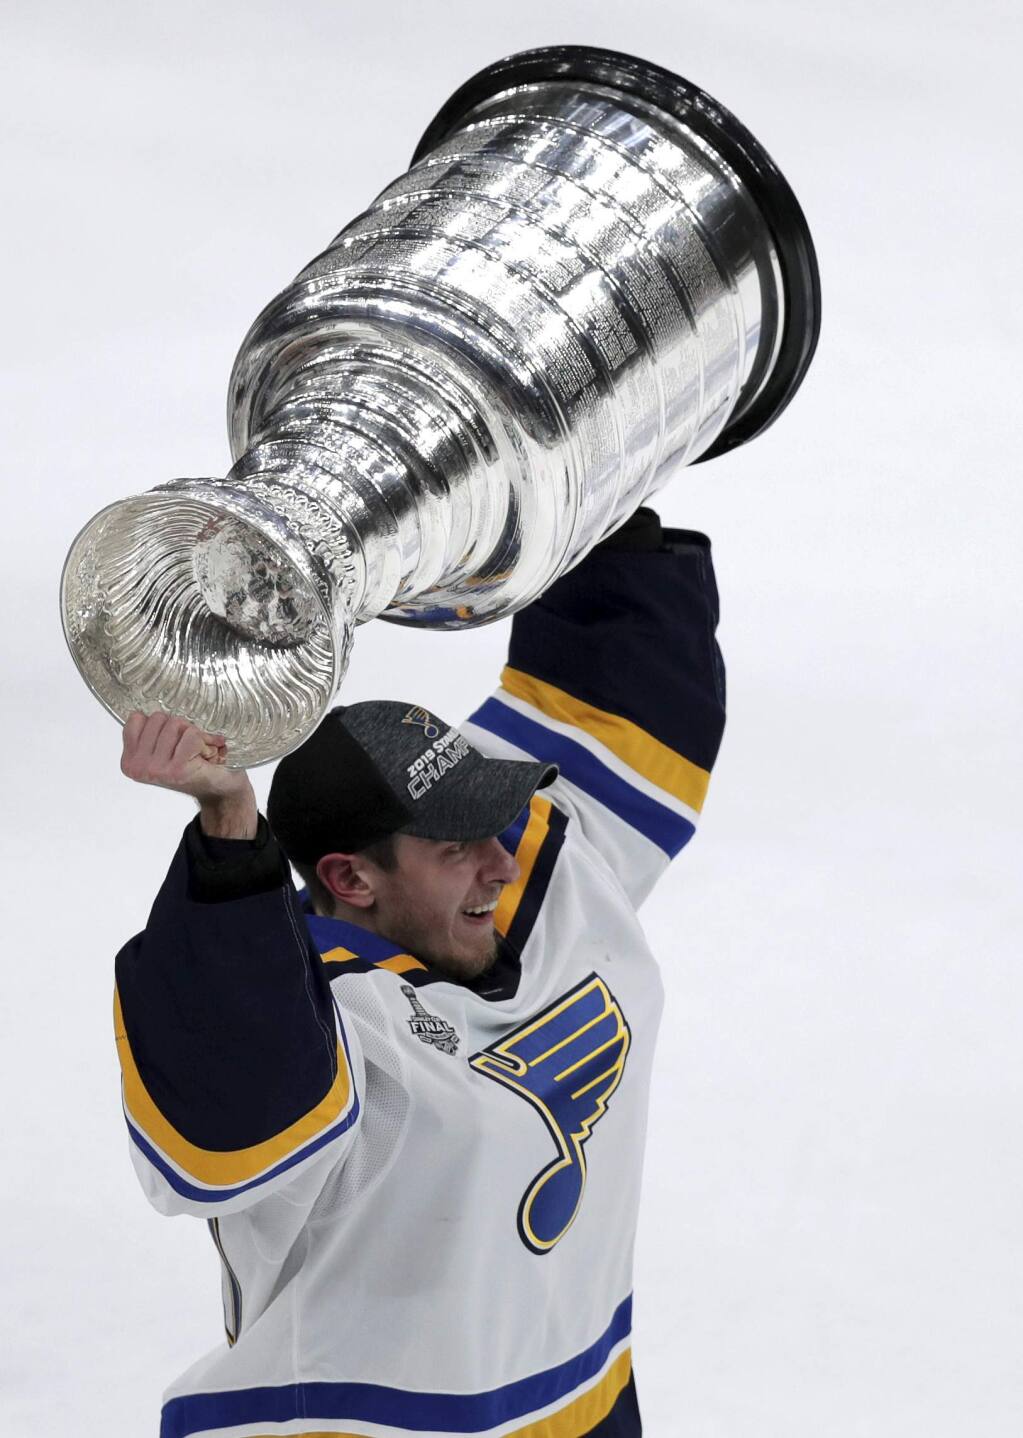 How the Blues Went From Last Place to the Stanley Cup Finals - The